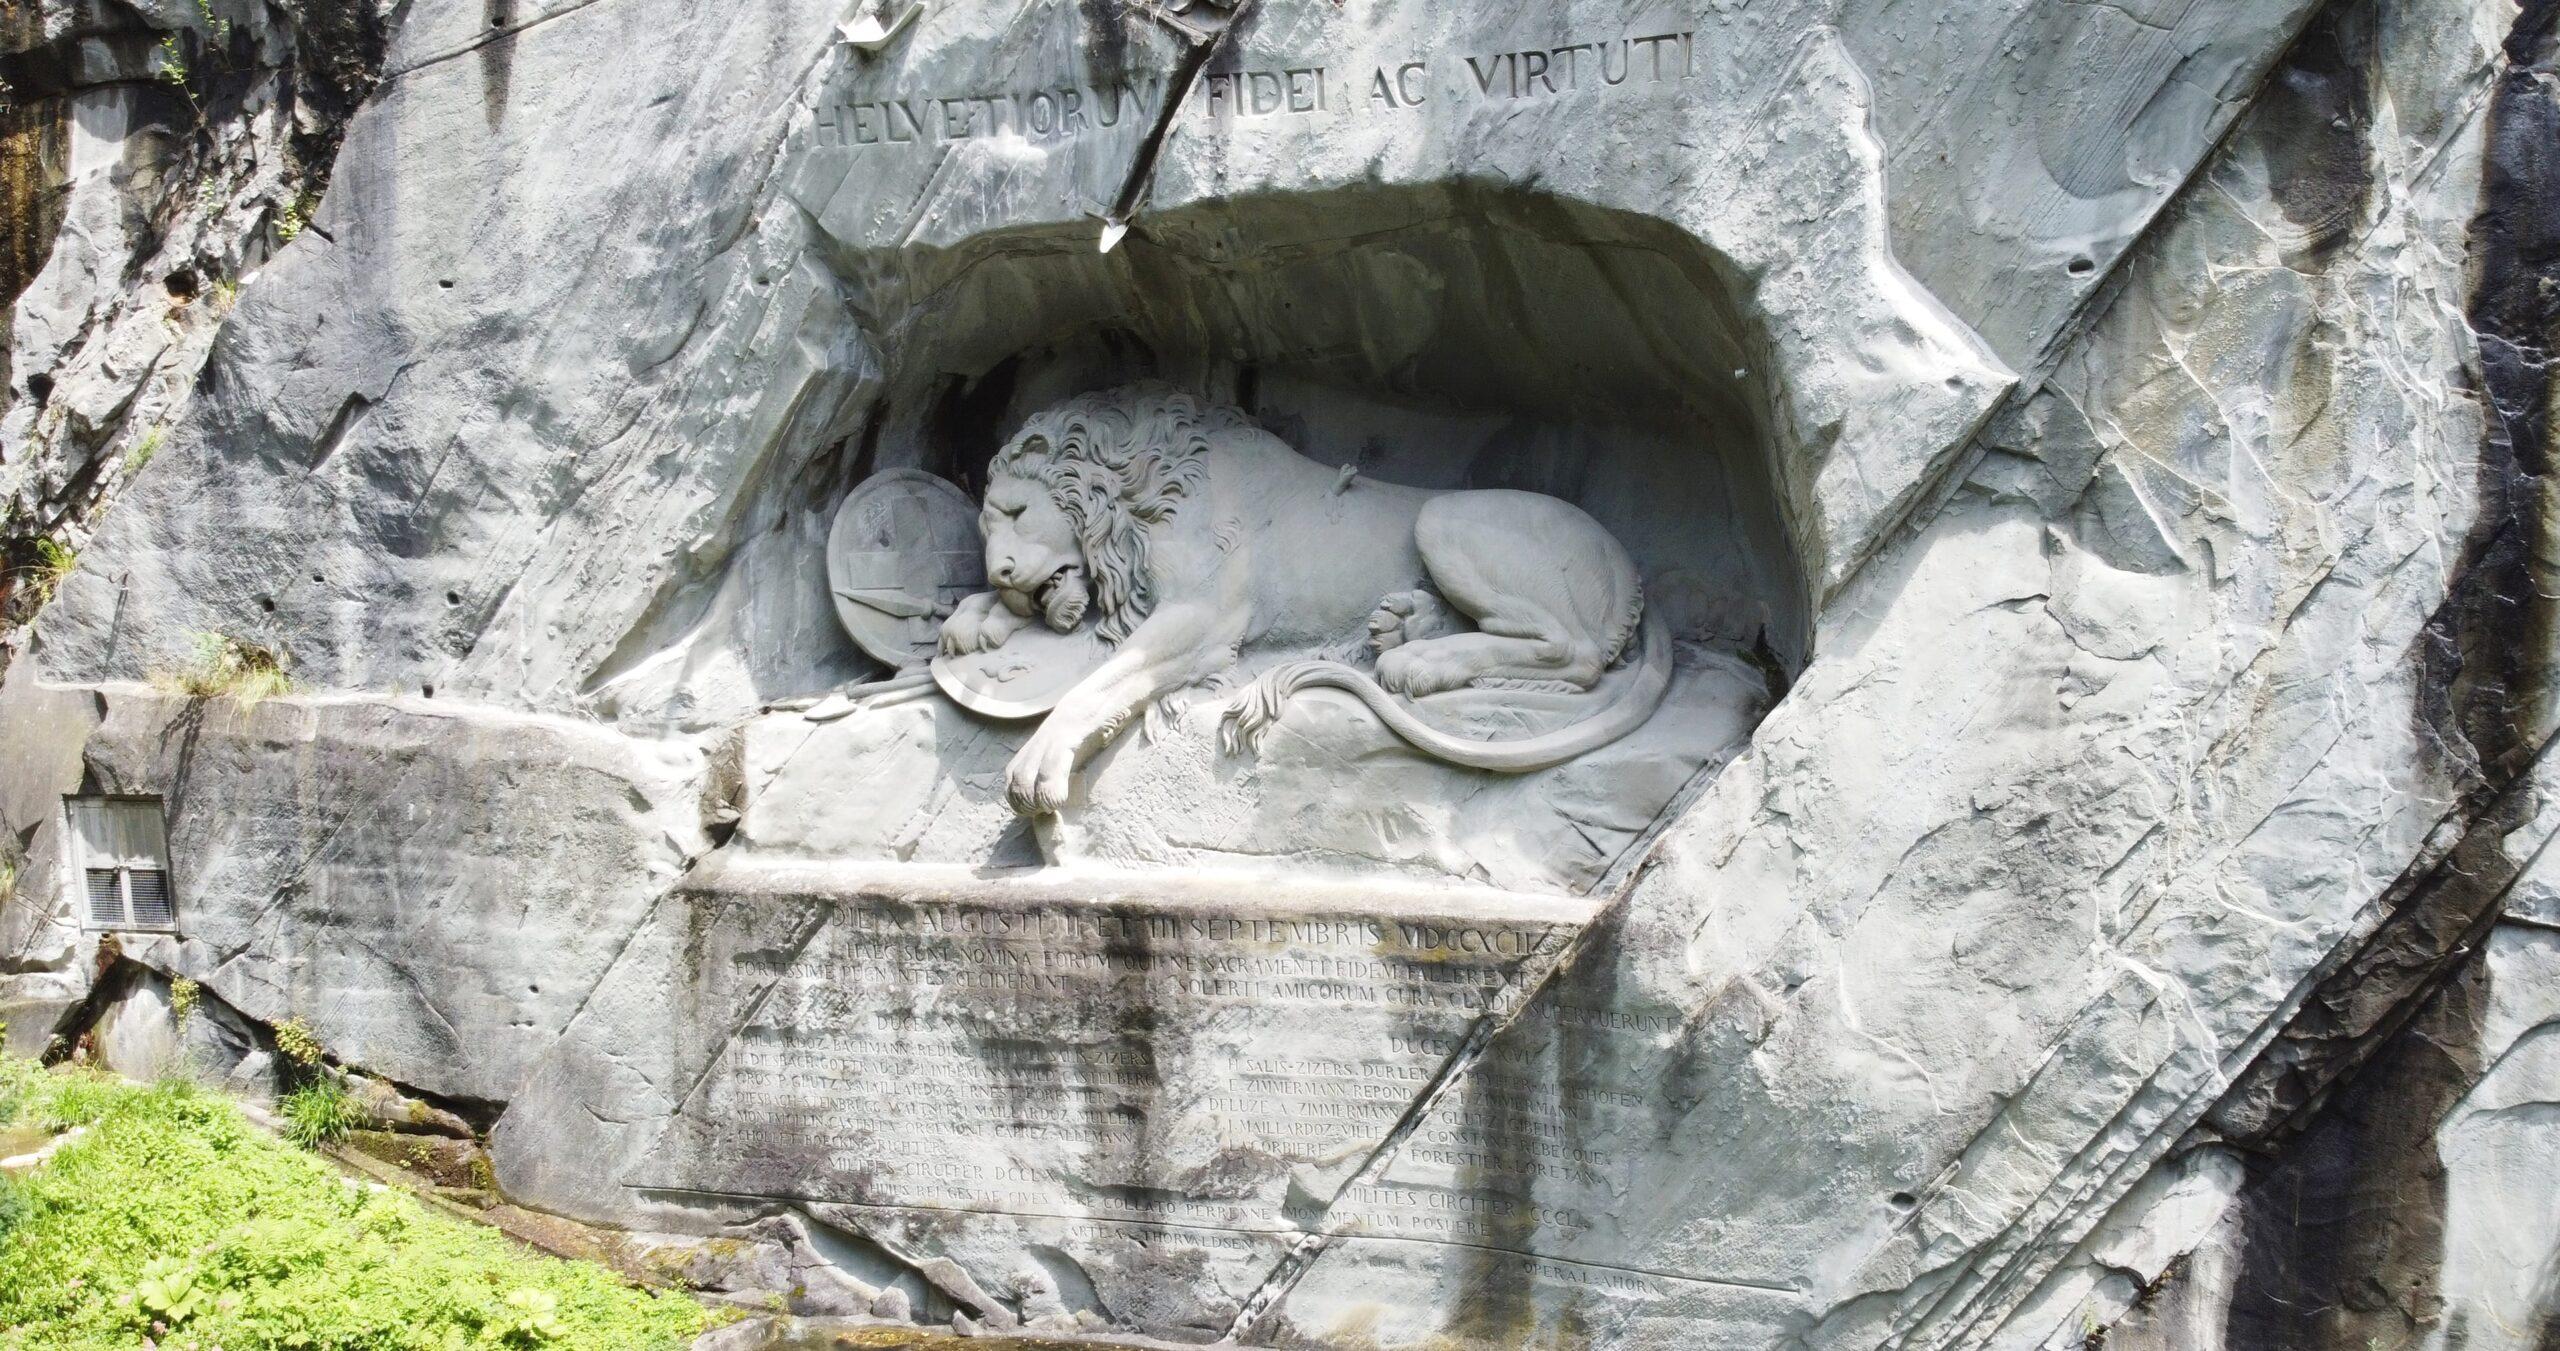 The Dying Lion monument